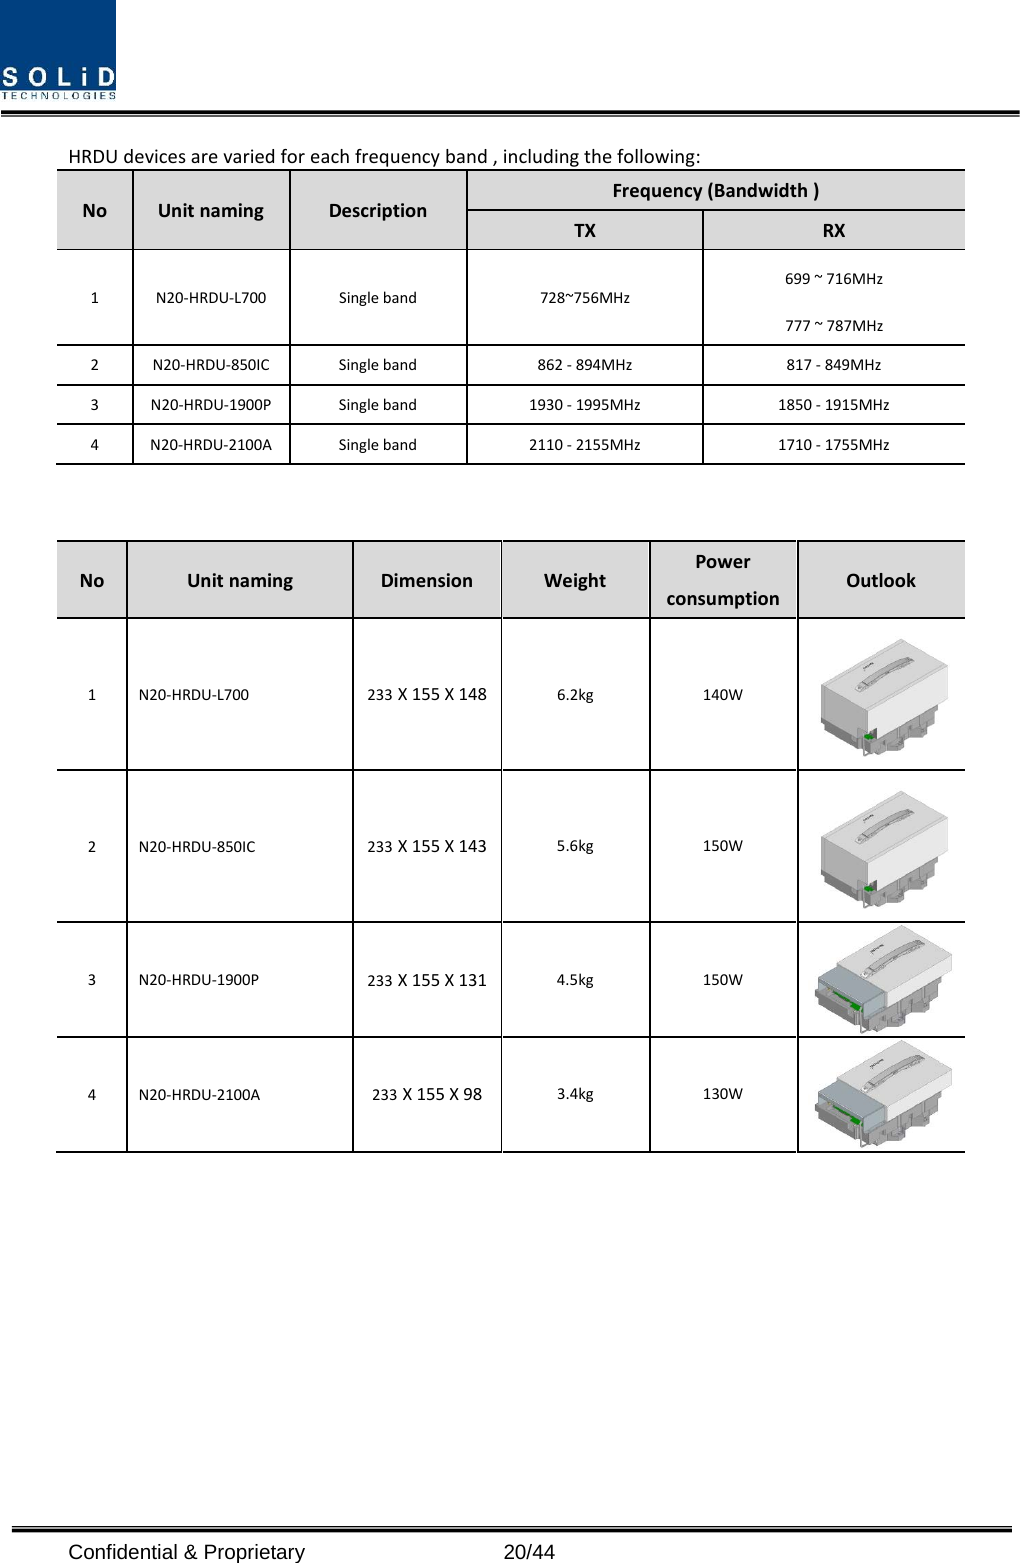  HRDU devices are varied for each frequency band , including the following: No Unit naming Description Frequency (Bandwidth )   TX RX 1  N20-HRDU-L700 Single band 728~756MHz   699 ~ 716MHz   777 ~ 787MHz 2  N20-HRDU-850IC Single band 862 - 894MHz    817 - 849MHz   3  N20-HRDU-1900P Single band 1930 - 1995MHz 1850 - 1915MHz   4  N20-HRDU-2100A Single band 2110 - 2155MHz    1710 - 1755MHz   No Unit naming Dimension Weight Power consumption Outlook 1  N20-HRDU-L700 233 X 155 X 148   6.2kg  140W  2  N20-HRDU-850IC 233 X 155 X 143 5.6kg 150W  3  N20-HRDU-1900P 233 X 155 X 131 4.5kg 150W  4  N20-HRDU-2100A 233 X 155 X 98 3.4kg 130W  Confidential &amp; Proprietary                   20/44 